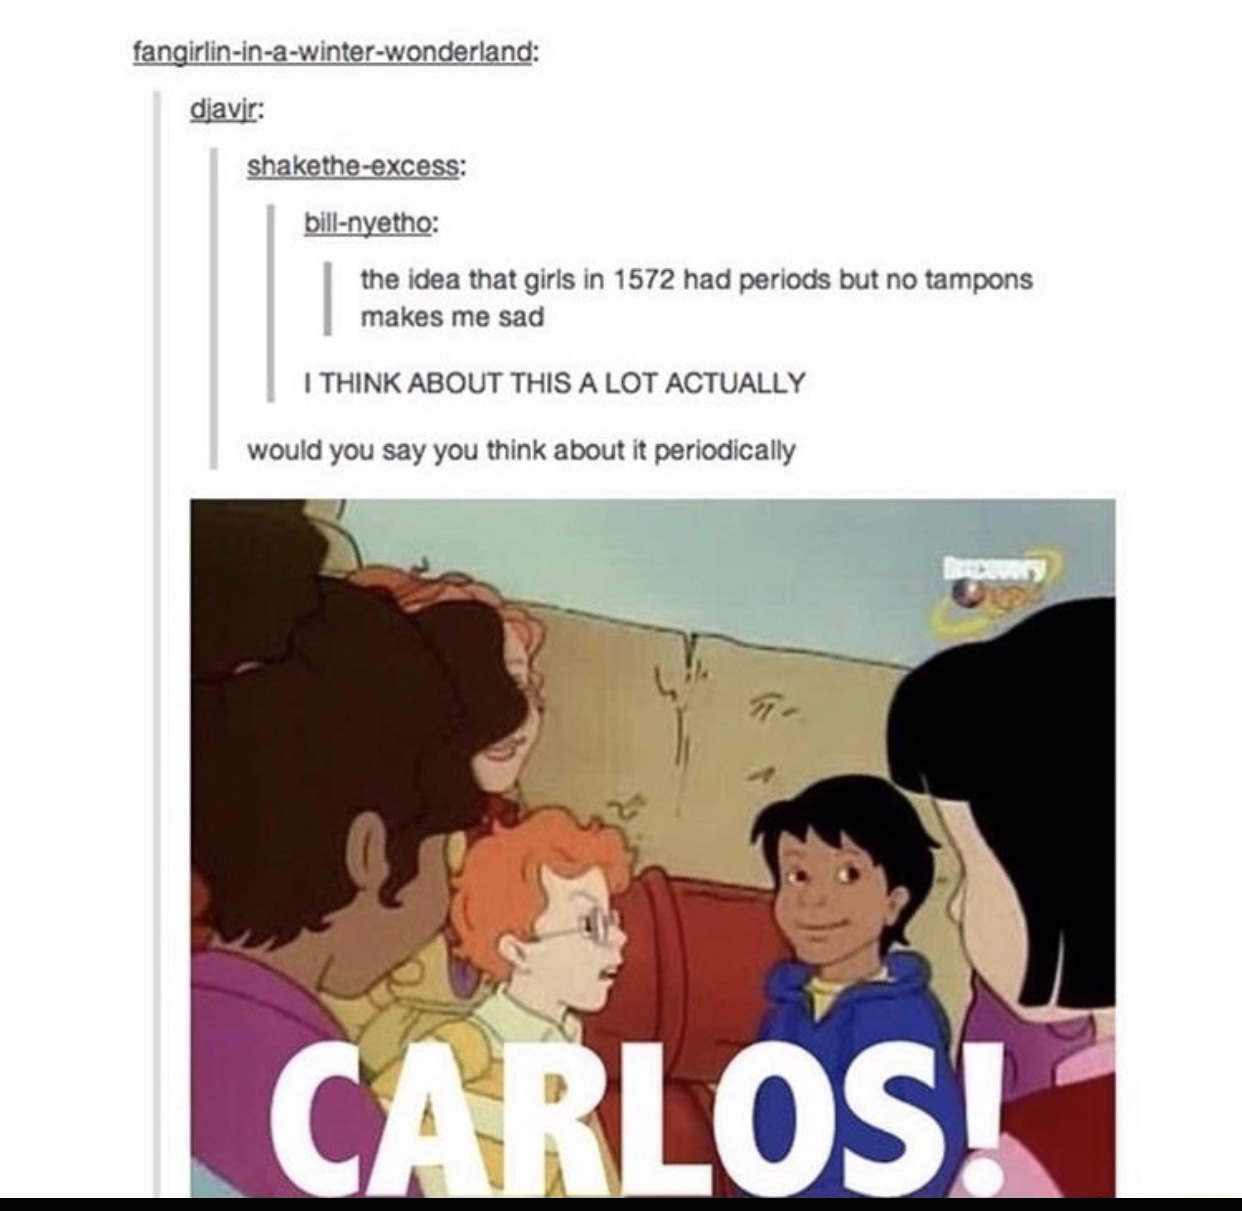 magic school bus tumblr funny - fangirlininawinterwonderland djavir shaketheexcess billnyetho the idea that girls in 1572 had periods but no tampons makes me sad I Think About This A Lot Actually would you say you think about it periodically Carlos!